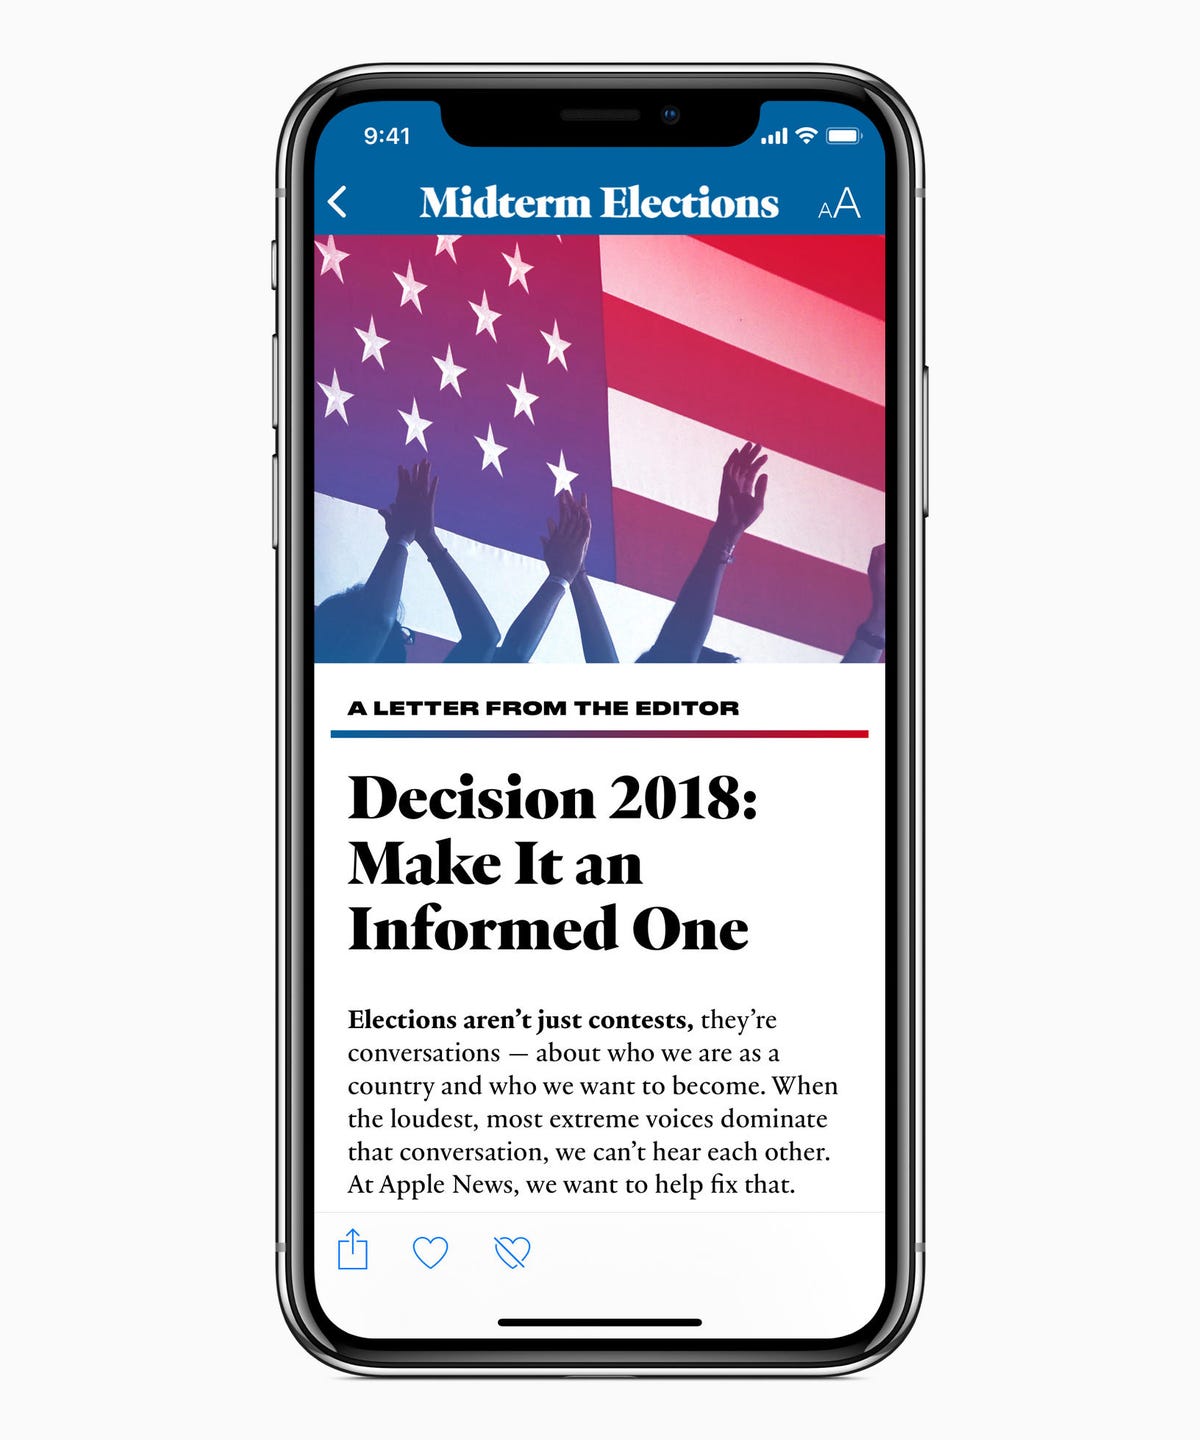 apple-news-2018-midterm-elections-editor-letter-062518